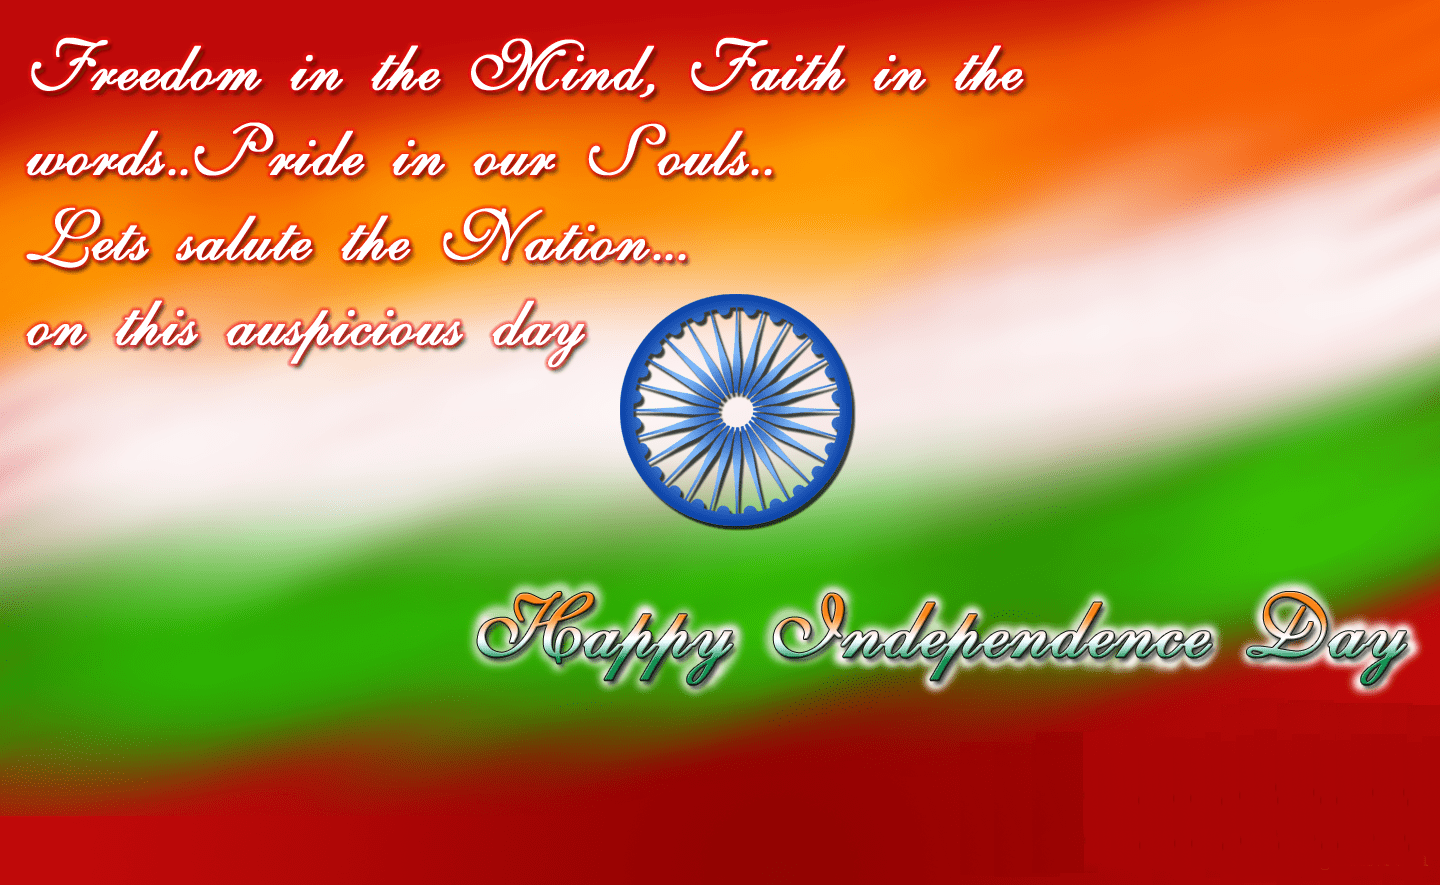 Motivational Independence Day Quotes